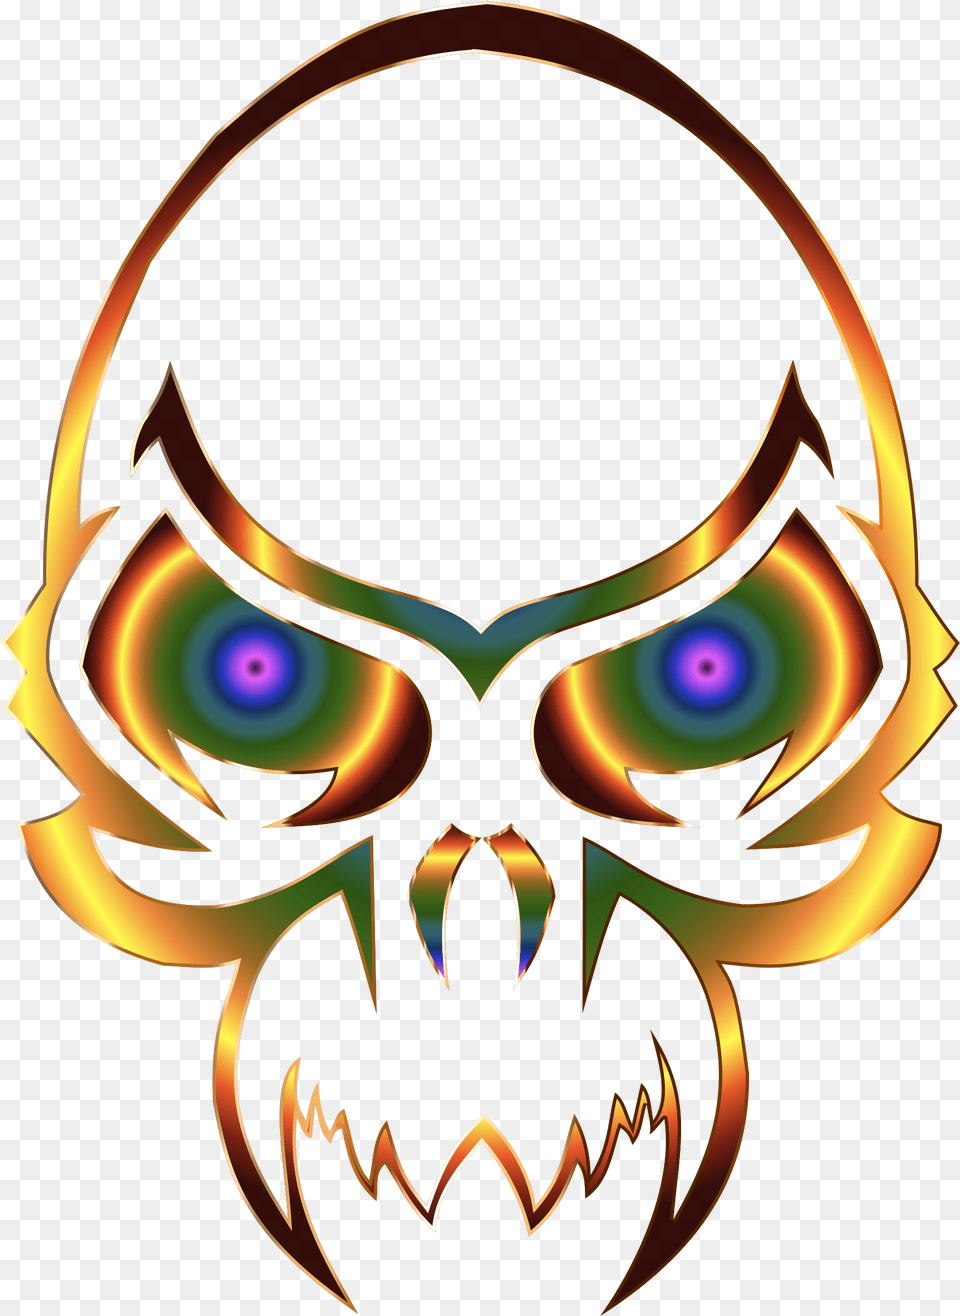 Colorful Skull 2 Clip Arts Tattoo Design Cartoons Skulls, Bow, Weapon, Accessories Png Image